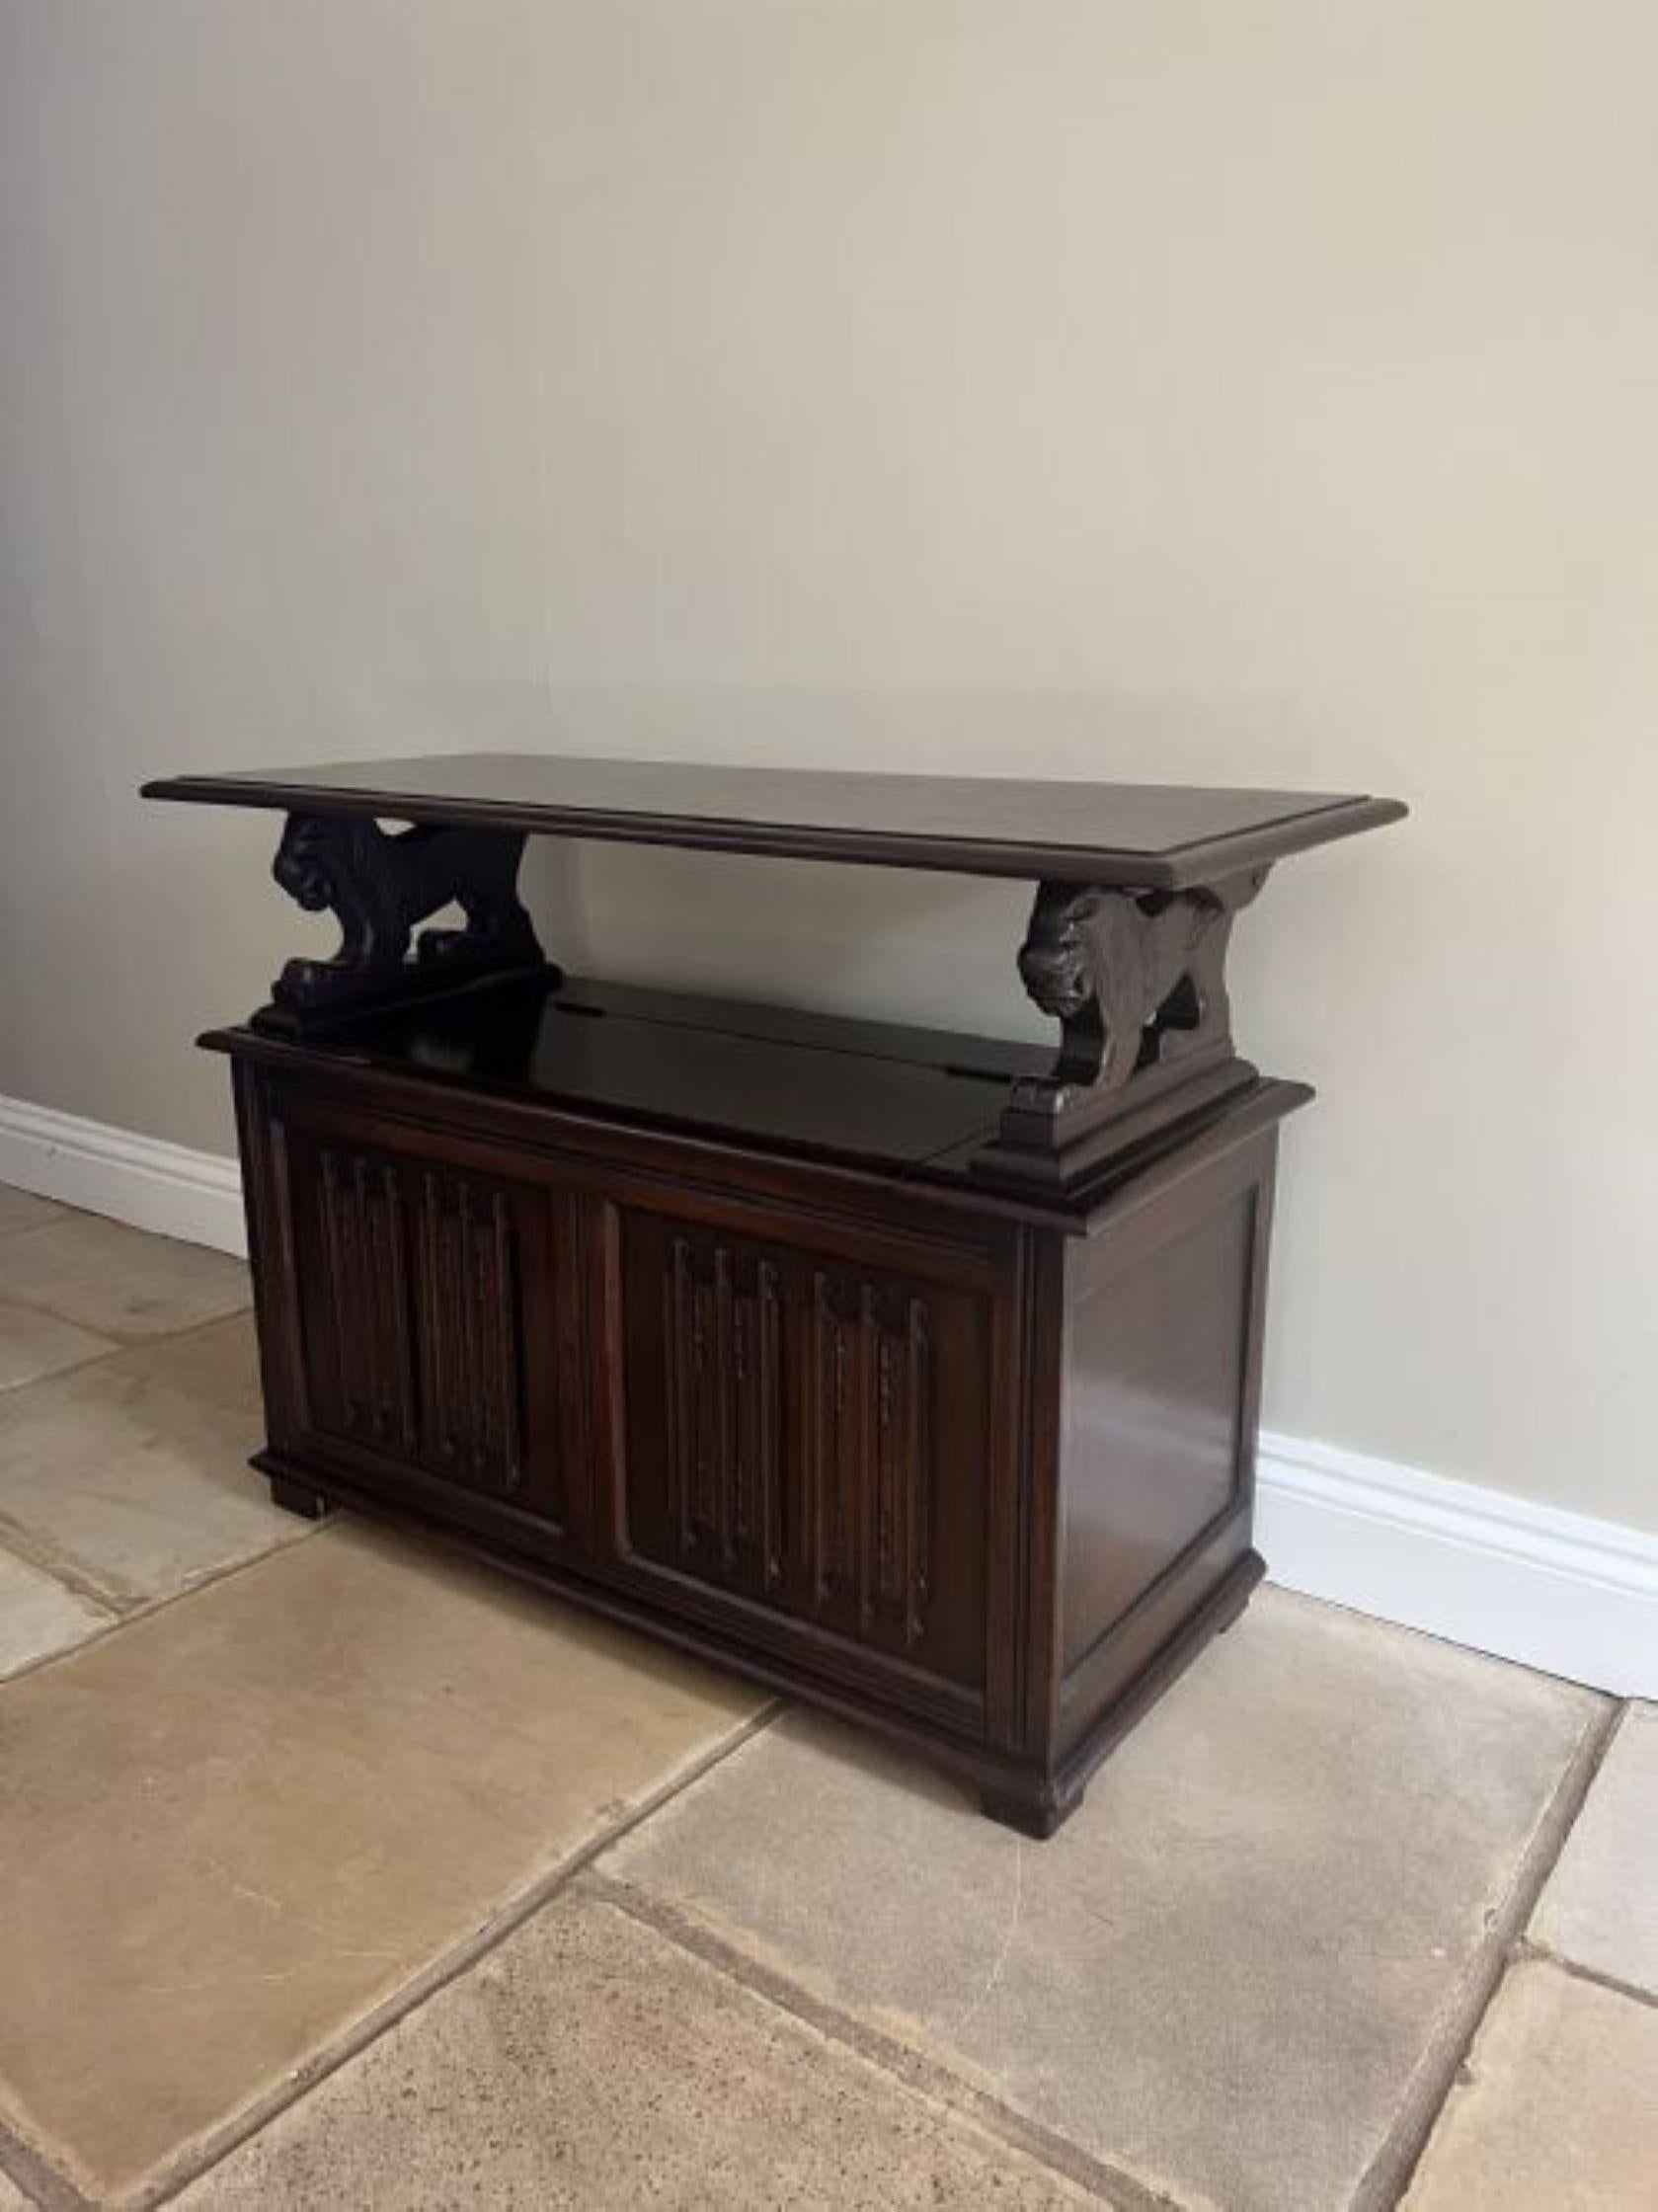 Antique quality carved oak monks bench having a quality carved oak fold over rectangular shape top with a moulded edge, supported by a pair of carved lions above a lining fold carved panelled seat with a lift up lid opening to reveal a storage